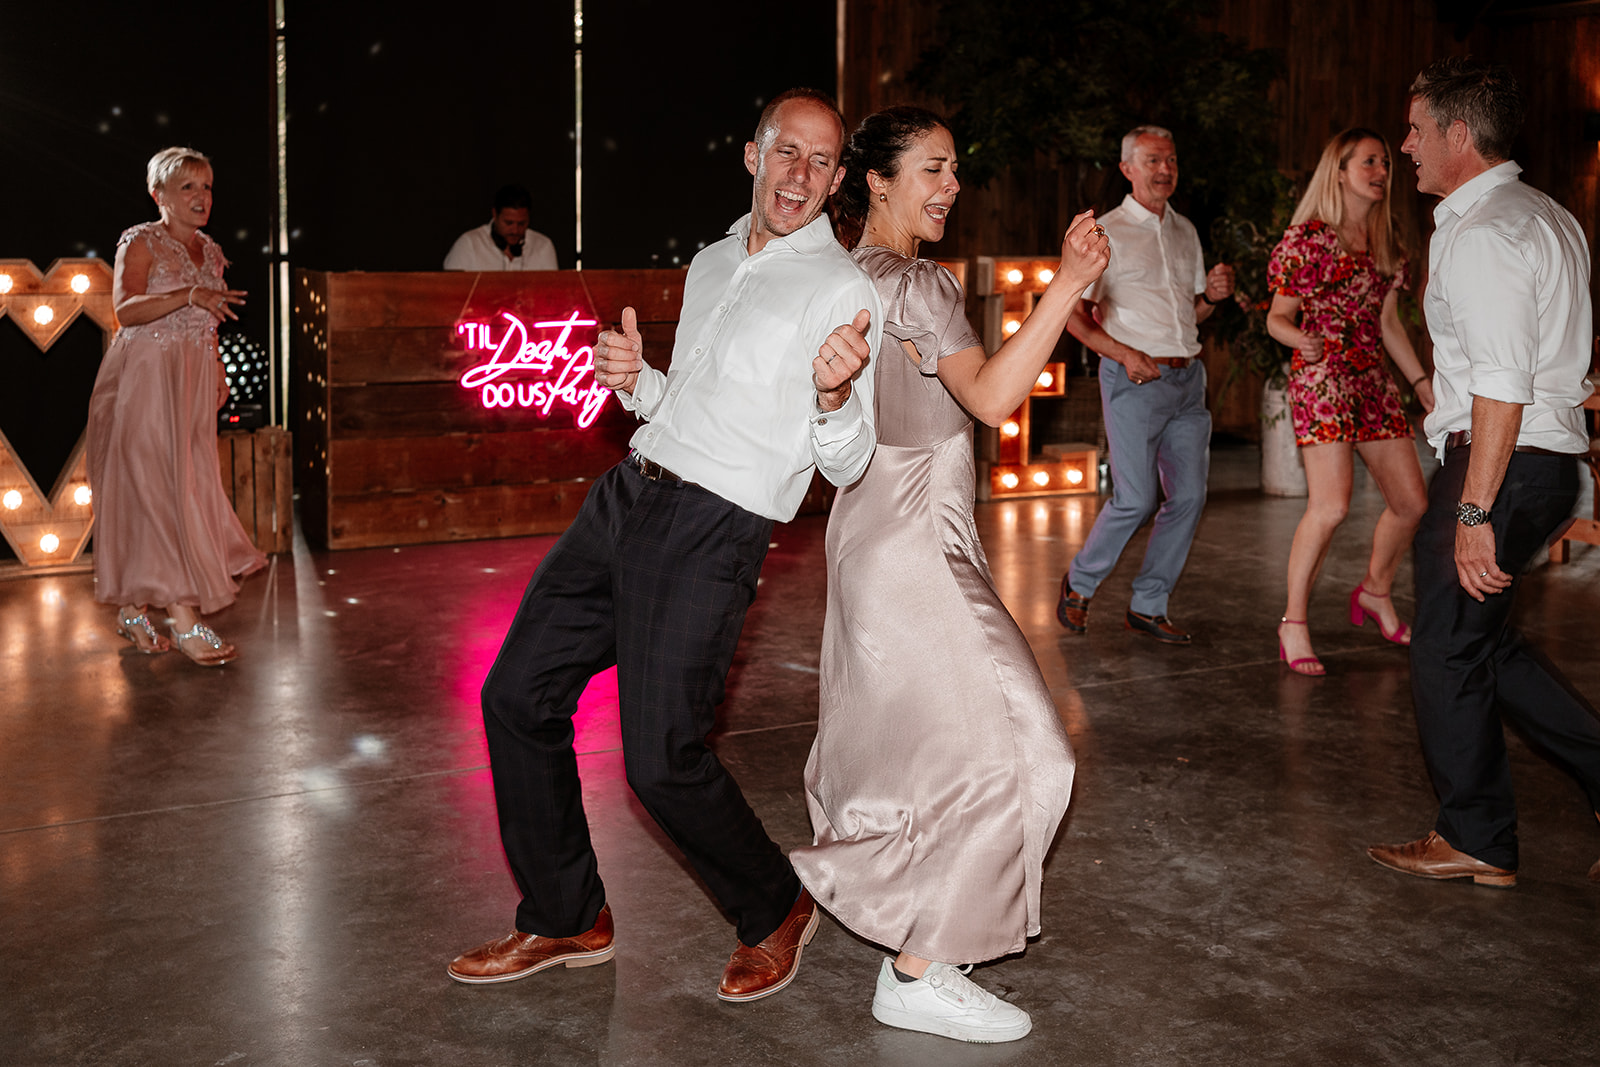 Guests dance together at a summer wedding at Silchester Farm